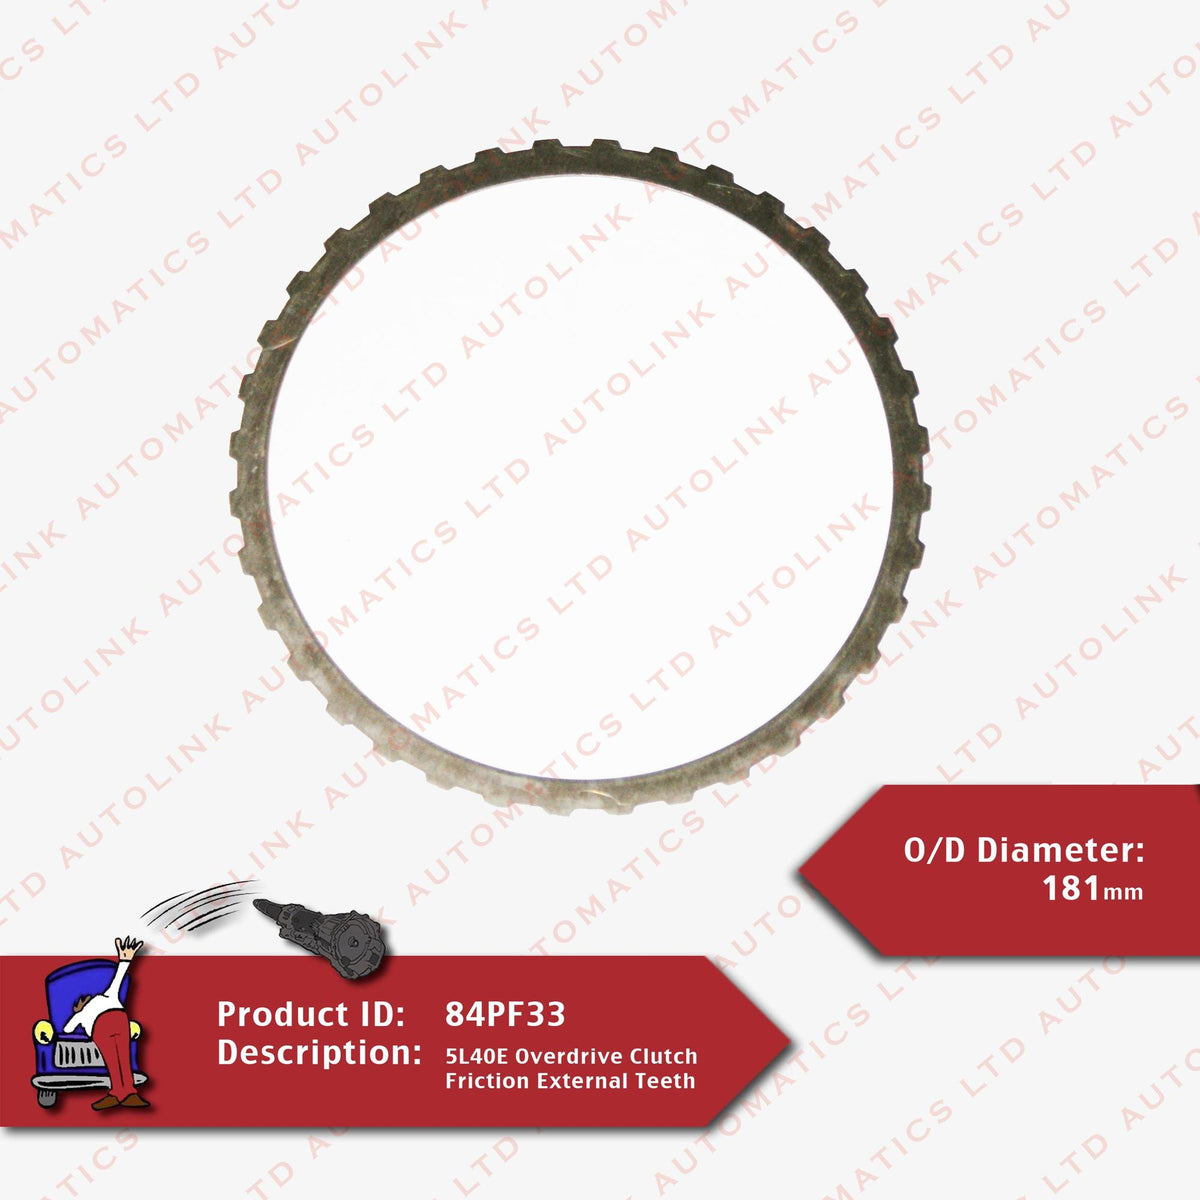 5L40E Friction Plate External Tooth Overdrive